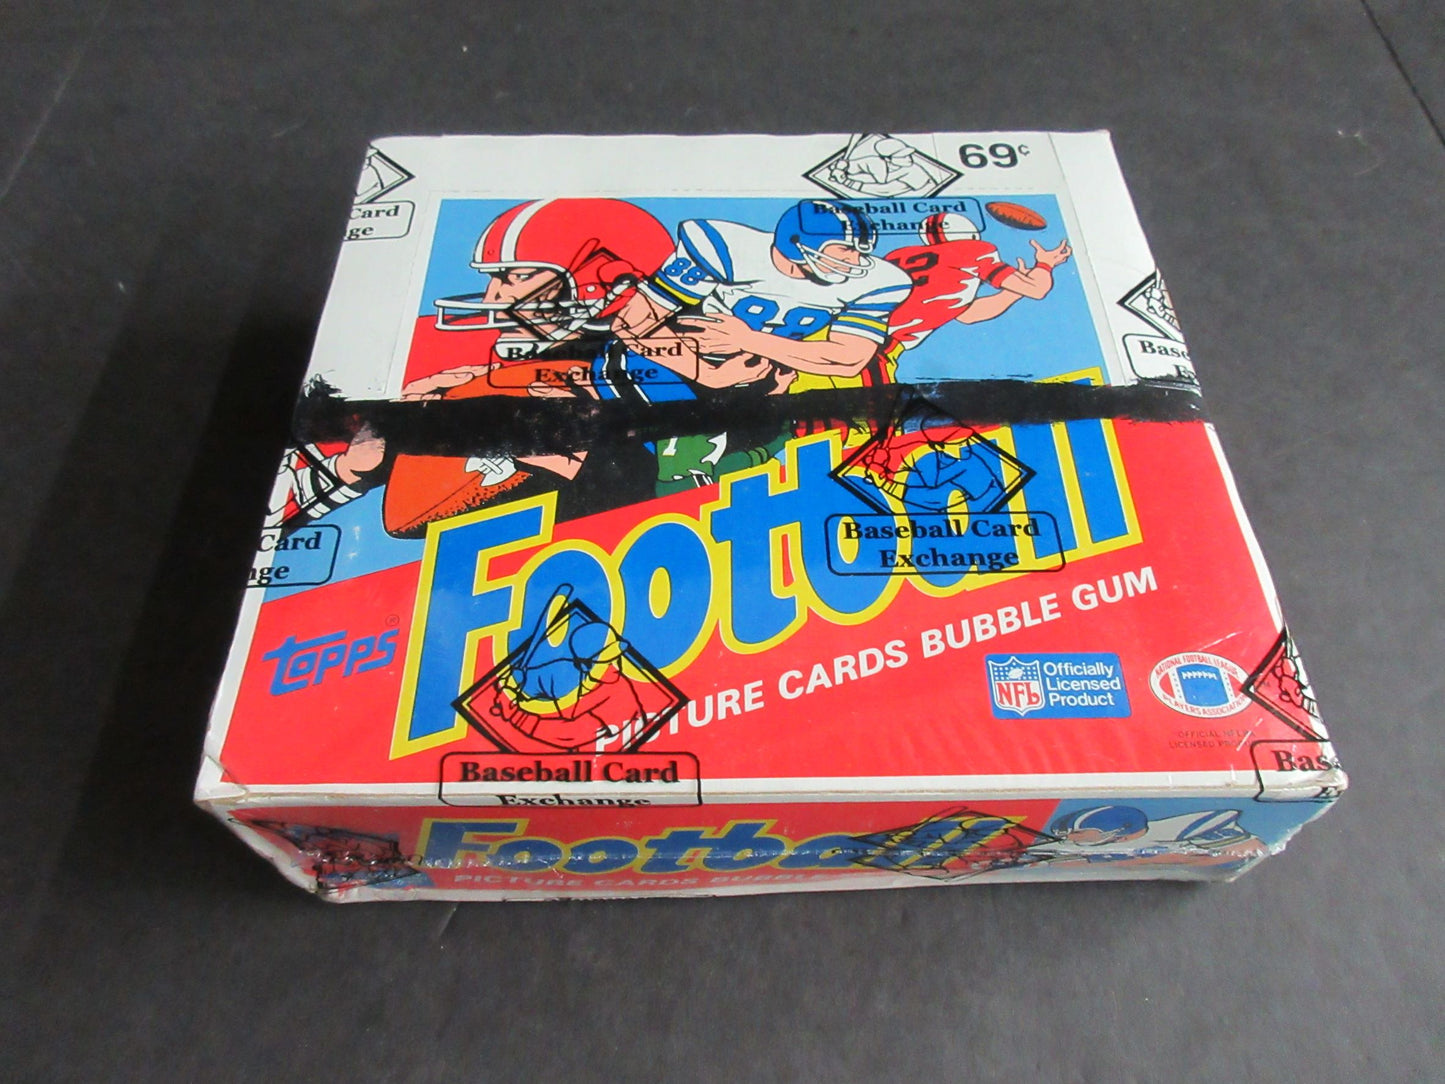 1986 Topps Football Unopened Cello Box (BBCE) (X-Out)